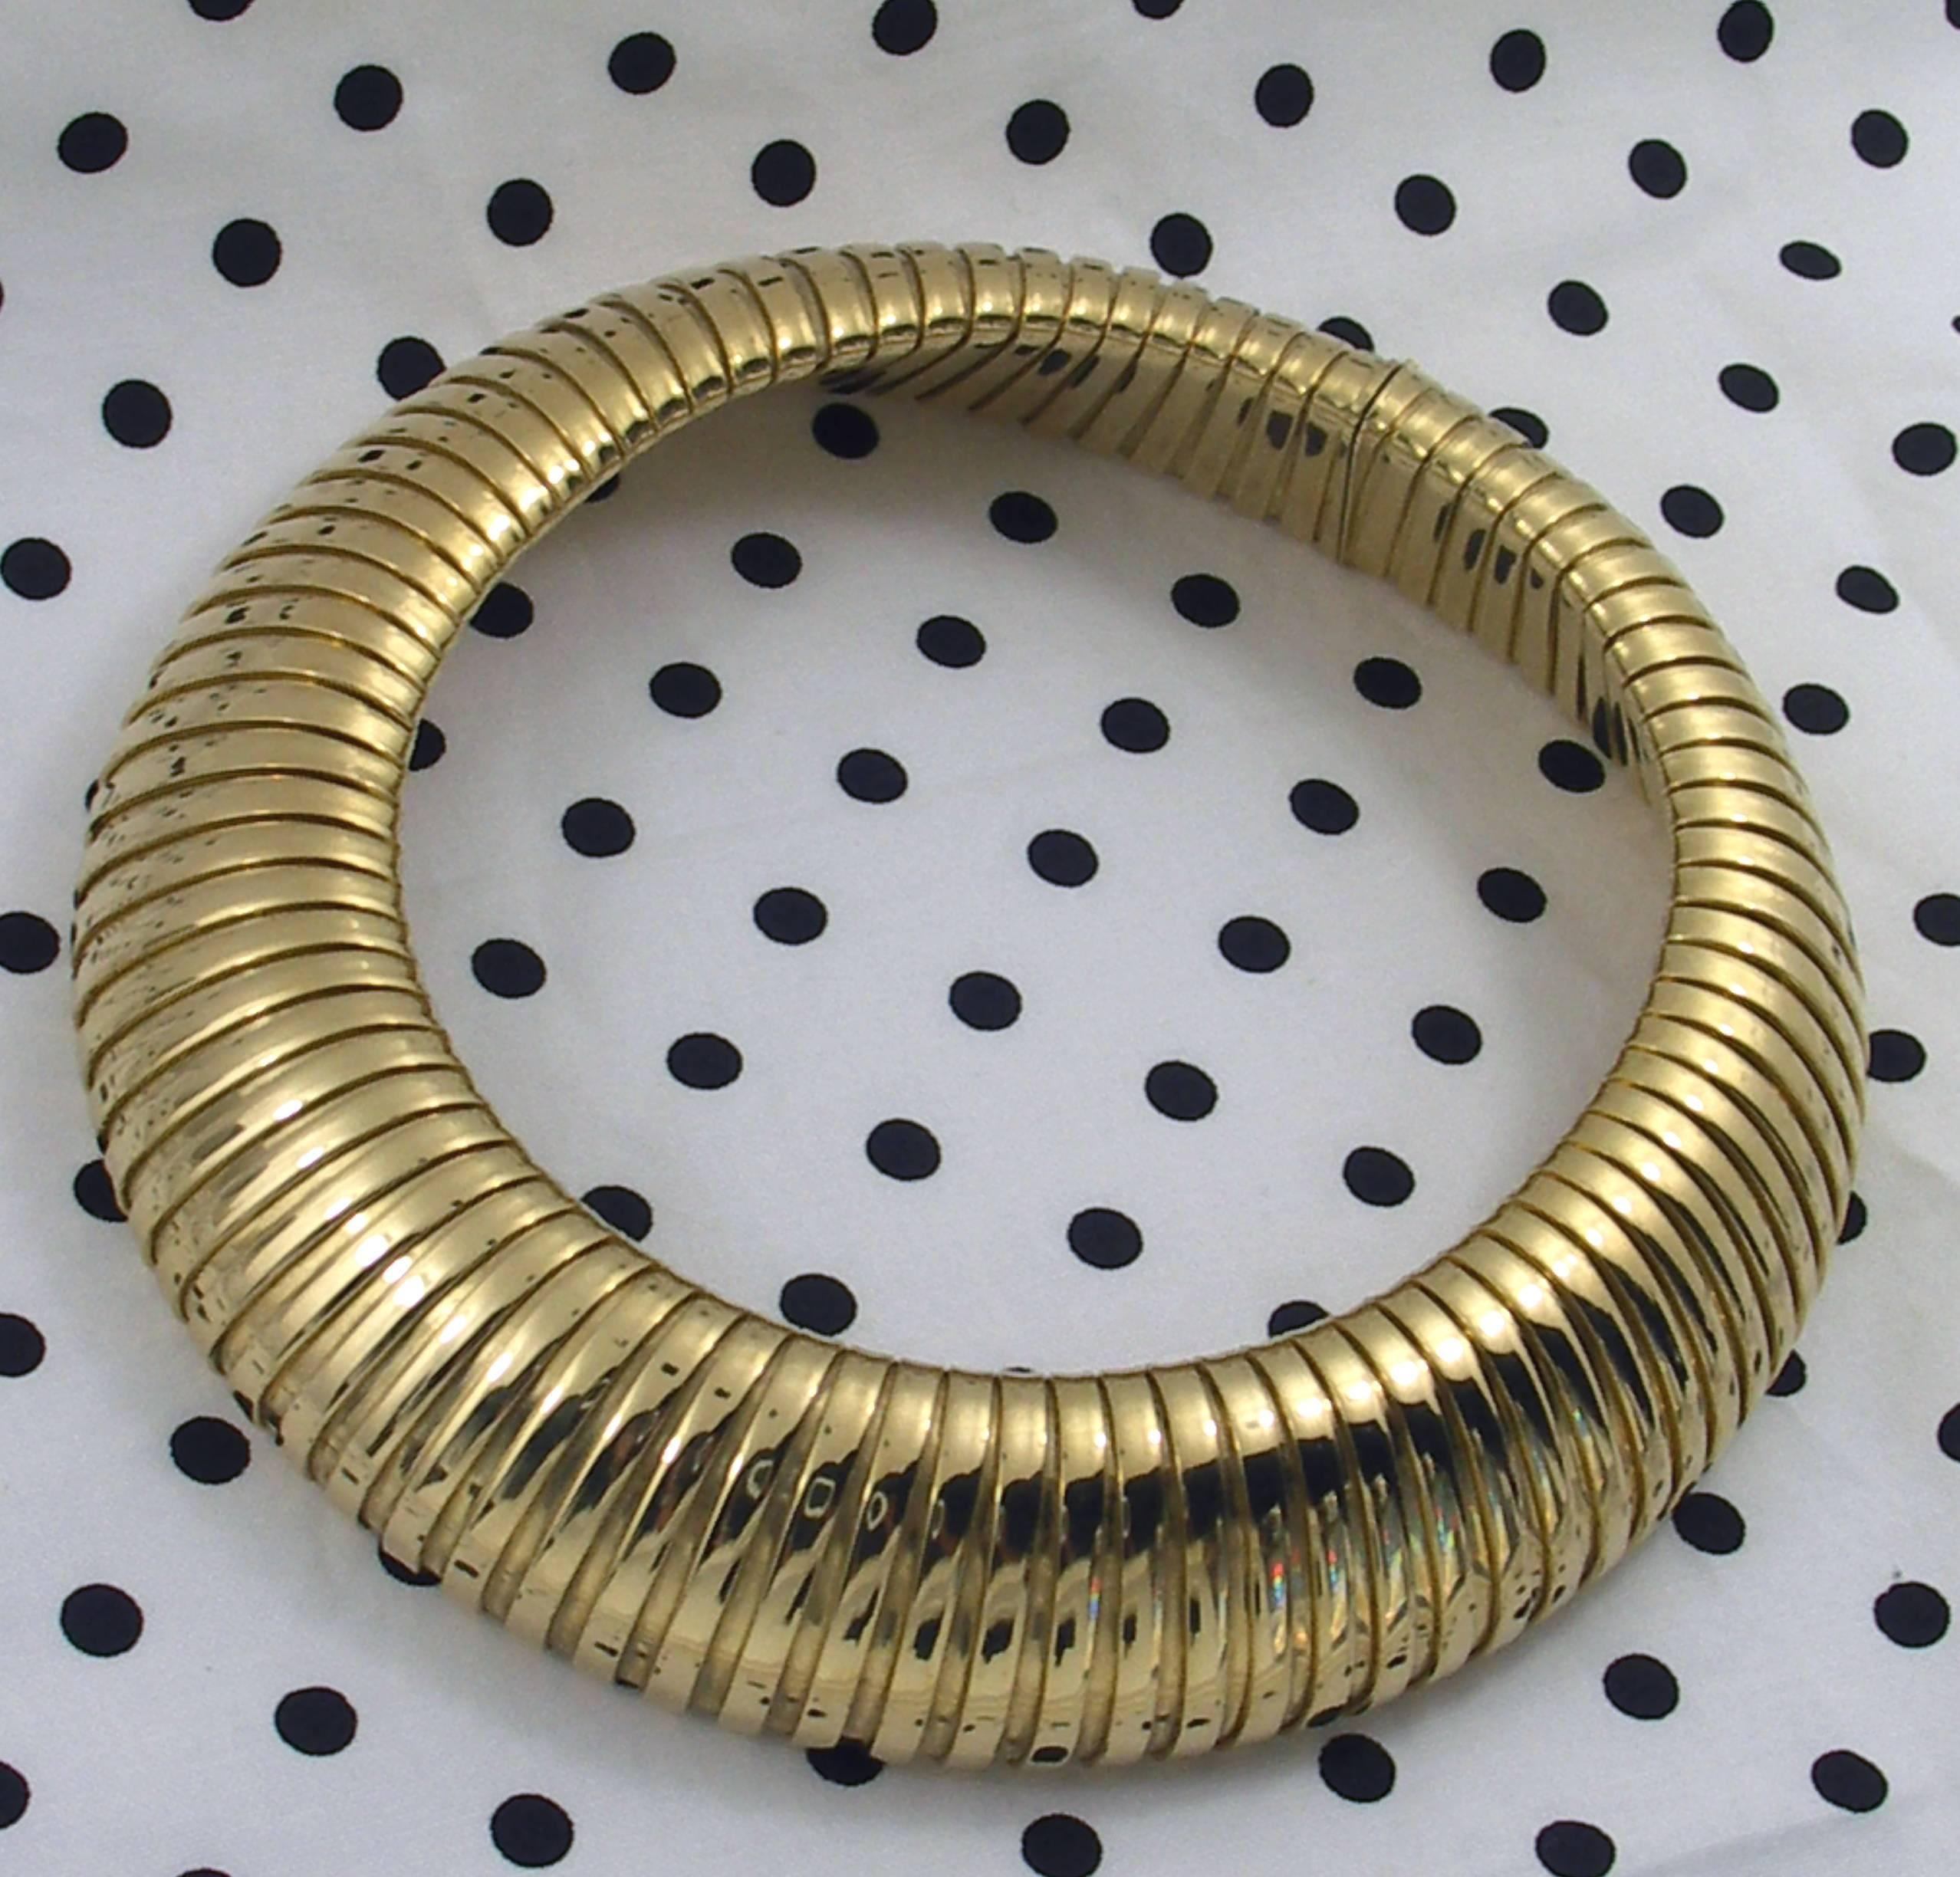 An 18K yellow gold Weingrill, choker length necklace. Designed in the gas tube style, it measures a substantial 1 1/4 inches wide. This beautifully finished collar will accommodate necks up to 16 1/2 inches.